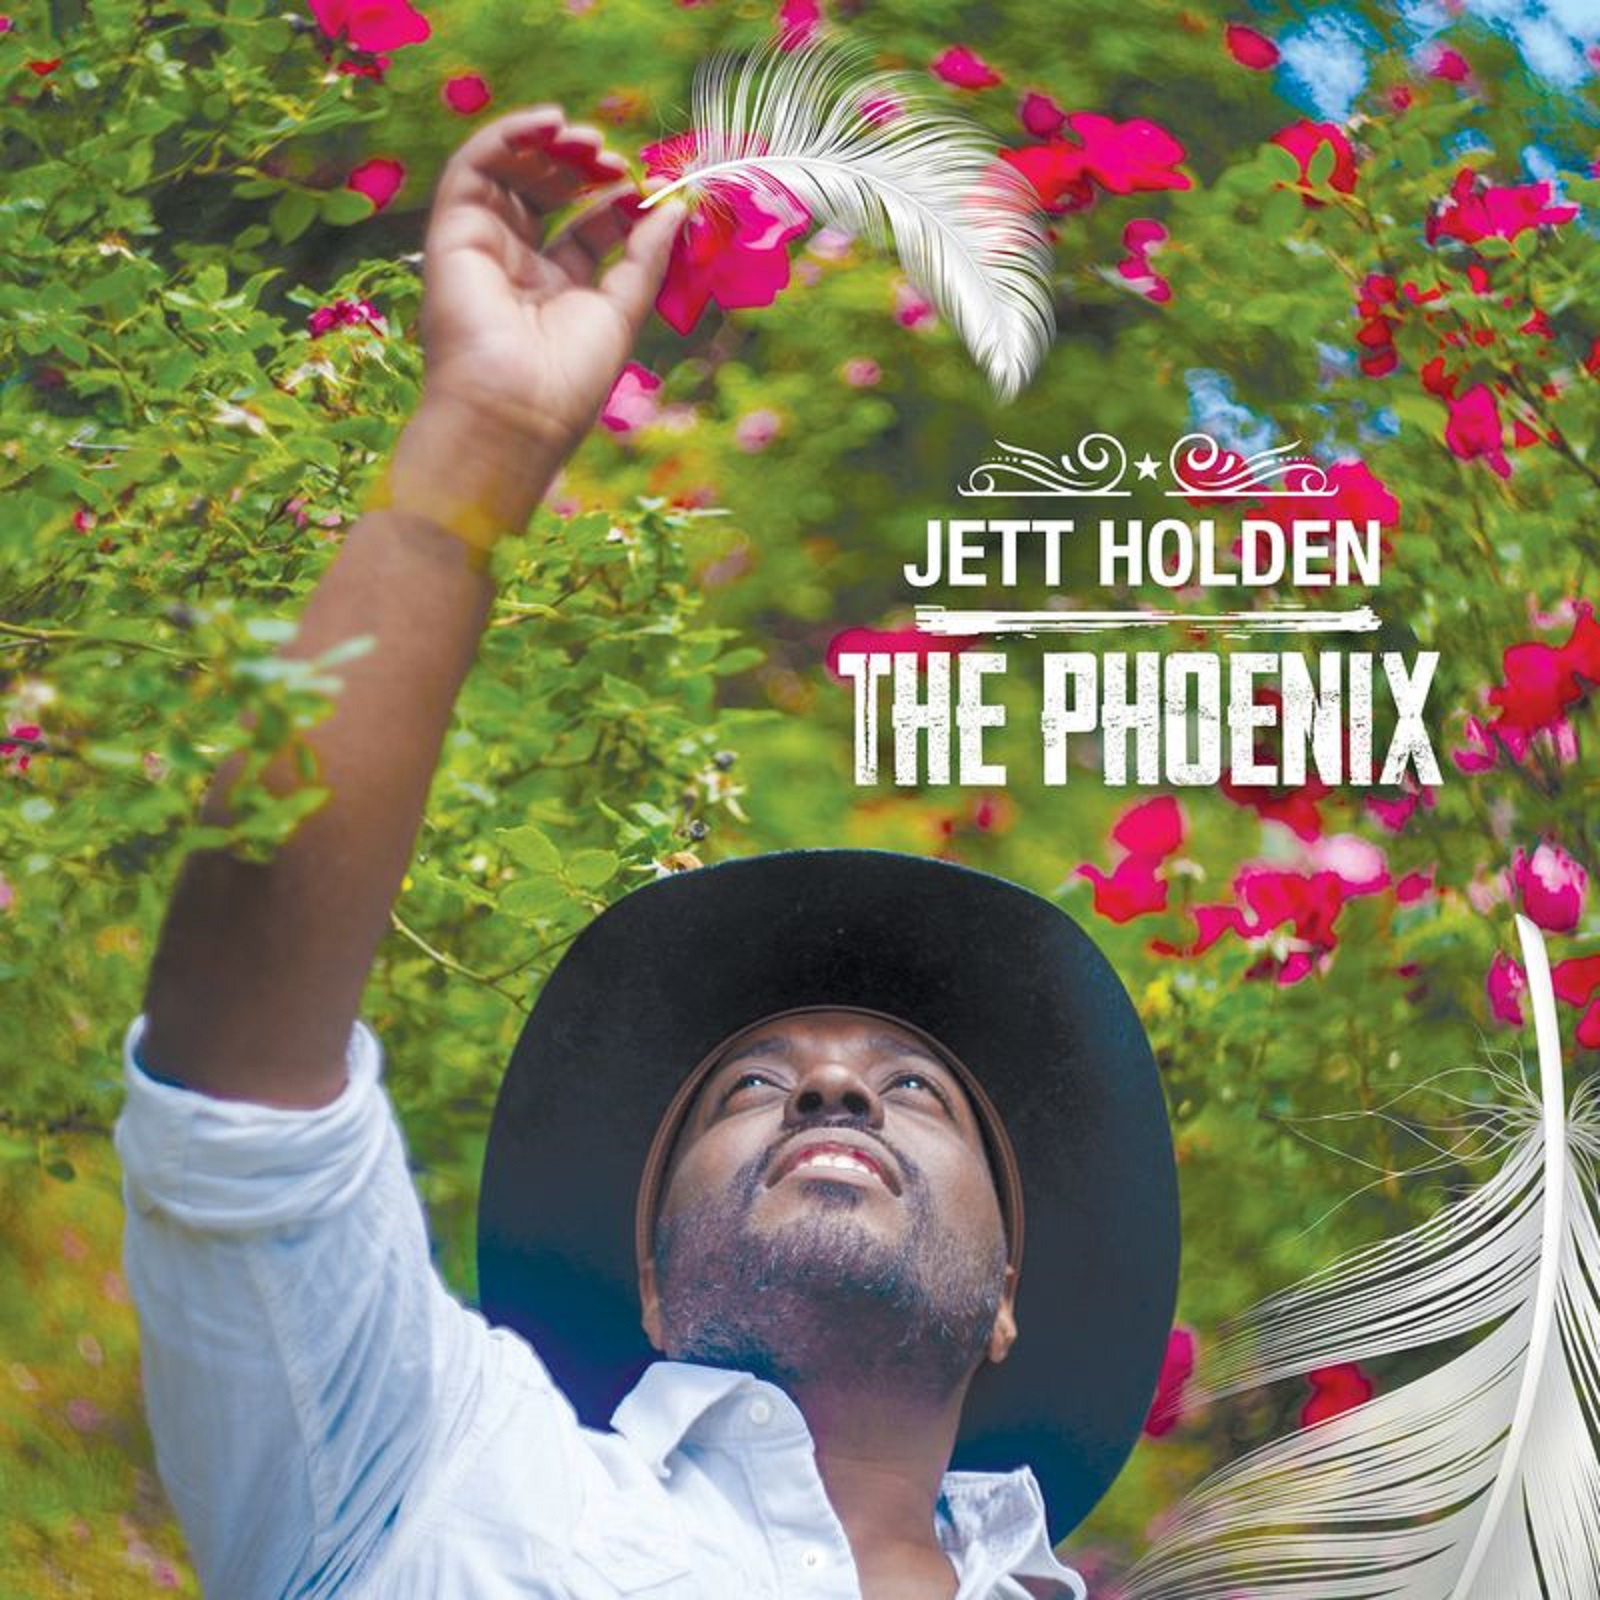 Jett Holden’s Debut Album The Phoenix Produced By Will Hoge Coming October 4 As The First Release On Black Opry Records